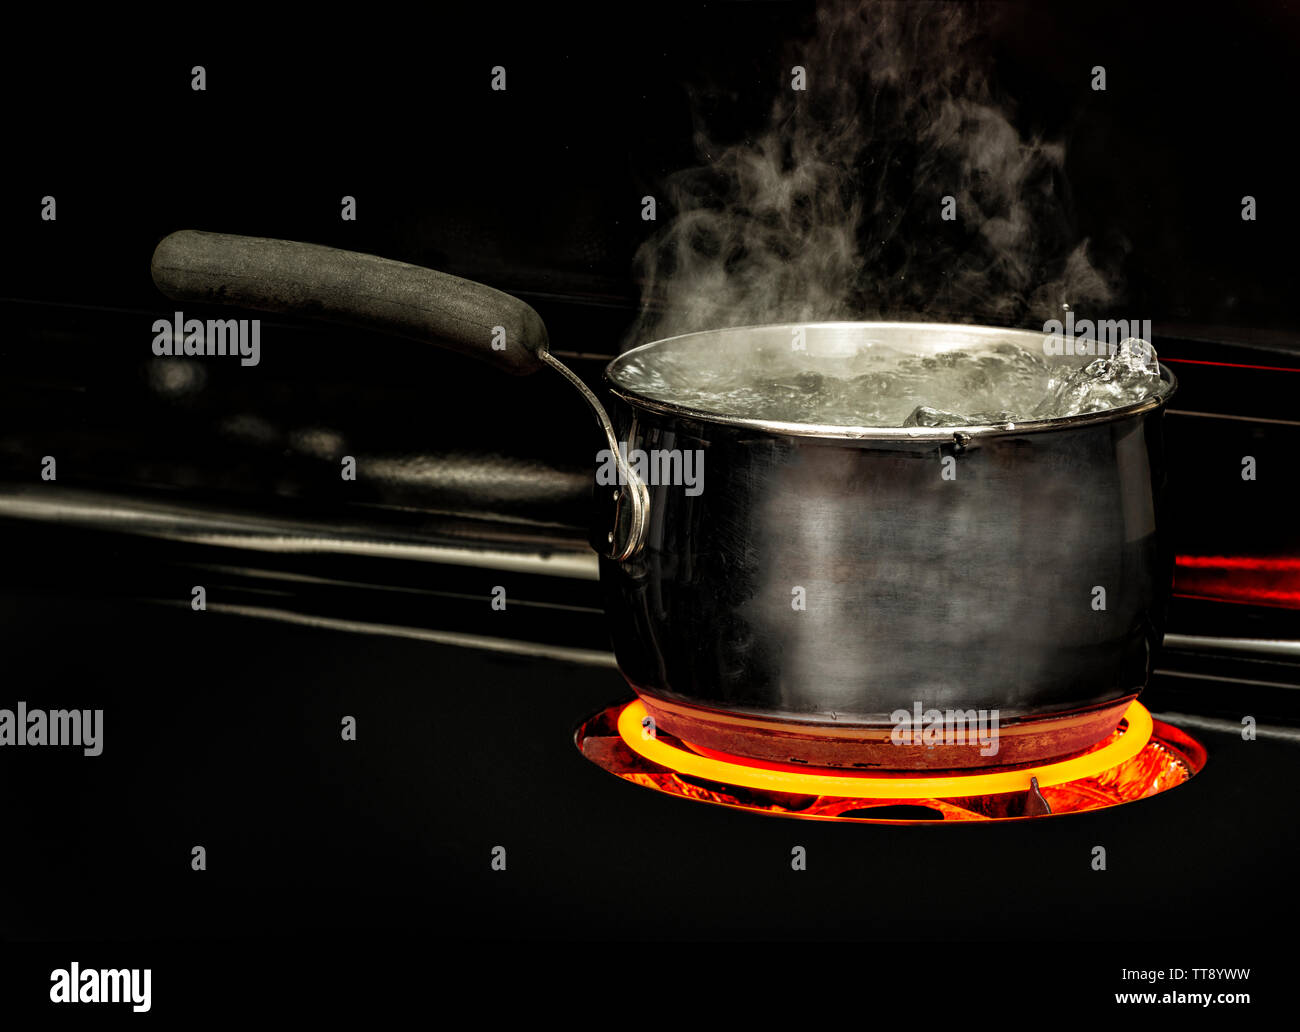 Horizontal shot of a boiling pot of water on a stovetop with a glowing red element. Stock Photo